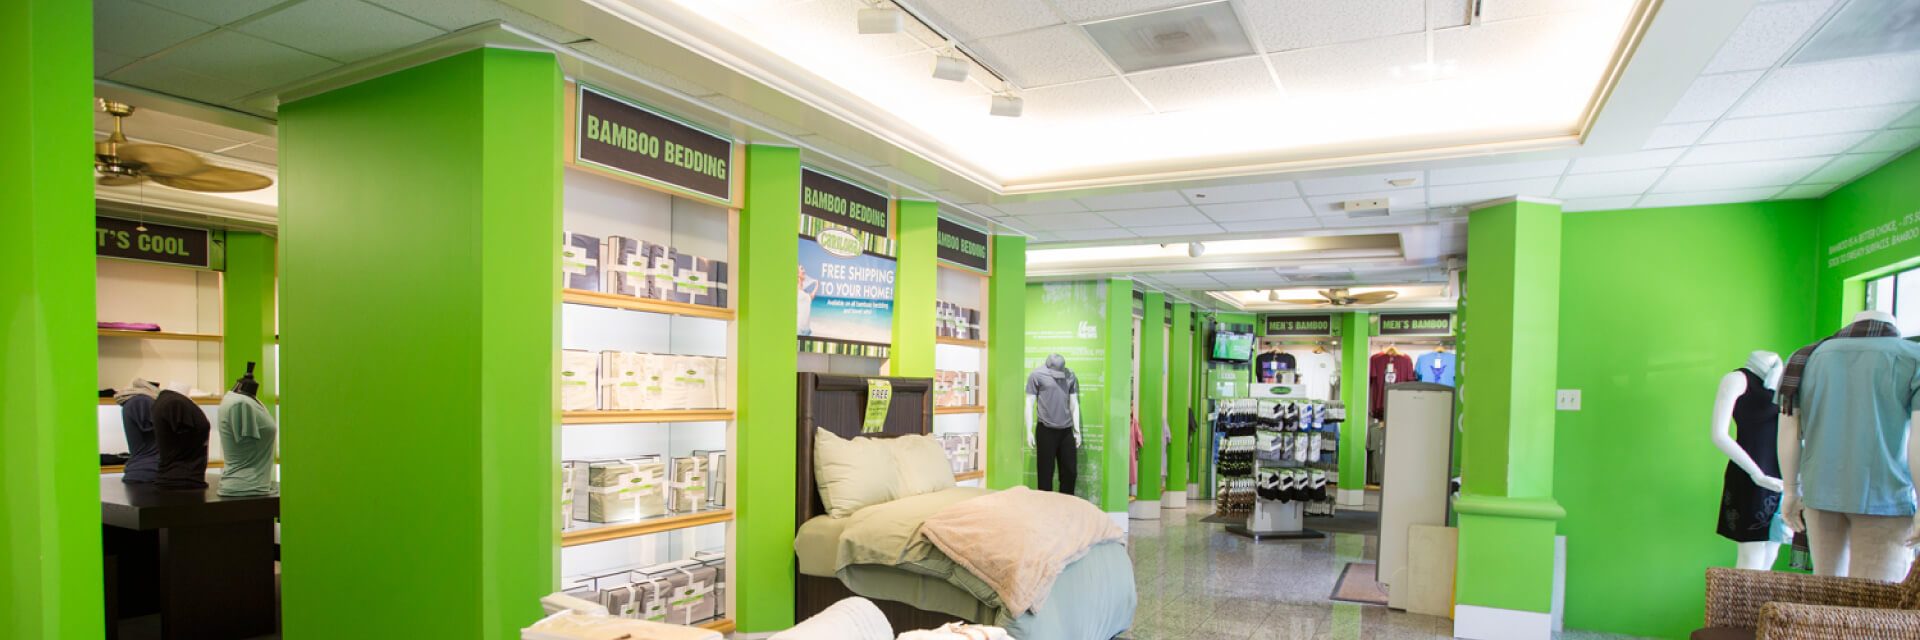 Bamboo Bedding store interior in Cayman Islands